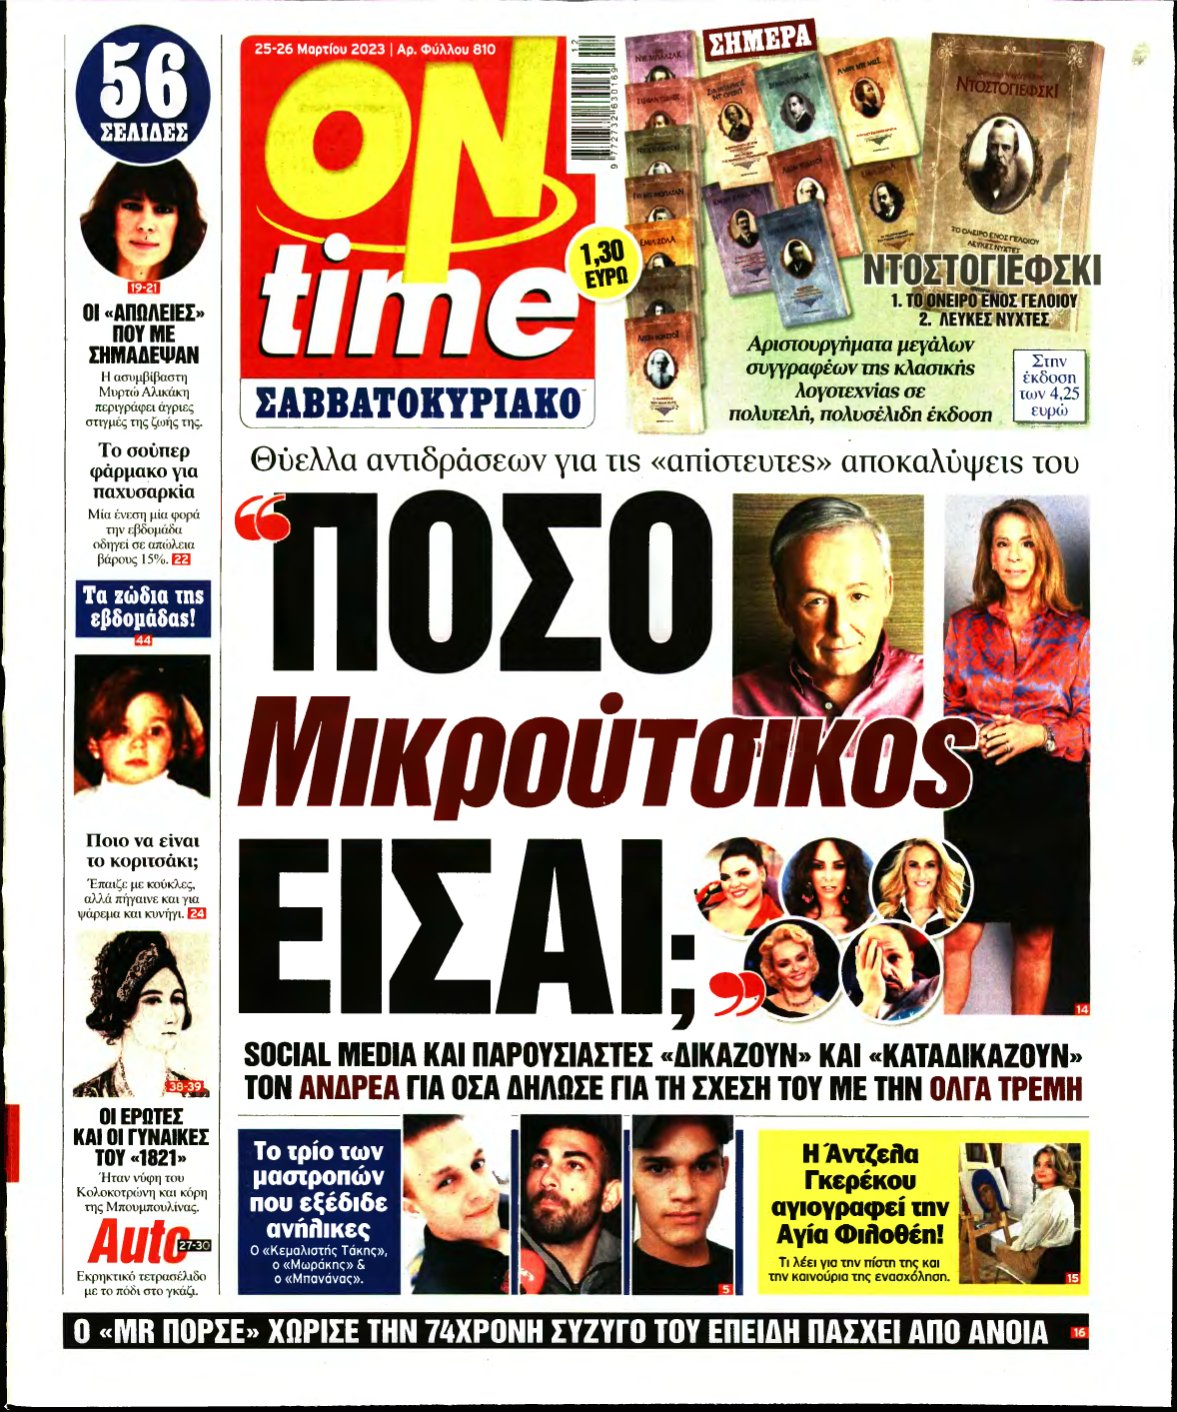 ON TIME – 25/03/2023